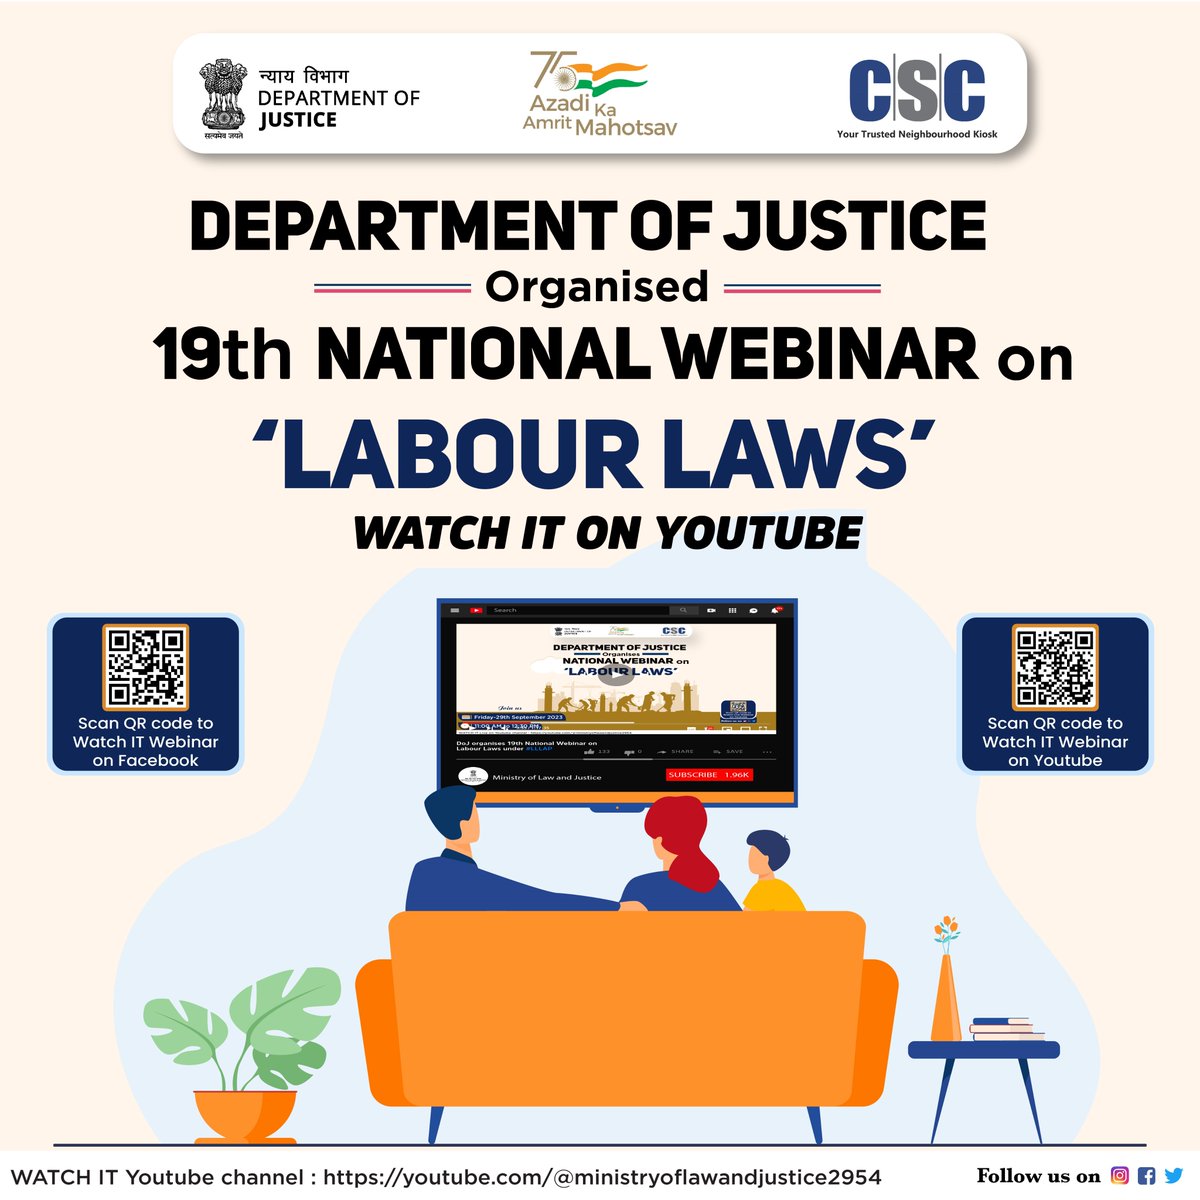 Department of Justice has organised a NATIONAL WEBINAR on 'LABOUR LAWS...

In case you missed it, watch it on the Ministry of Law and Justice YouTube Page: youtube.com/watch?v=XBBa96…

#CSC #DigitalIndia #RuralEmpowerment #DepartmentOfJustice #DoJ #AccessToJustice #LabourLaws